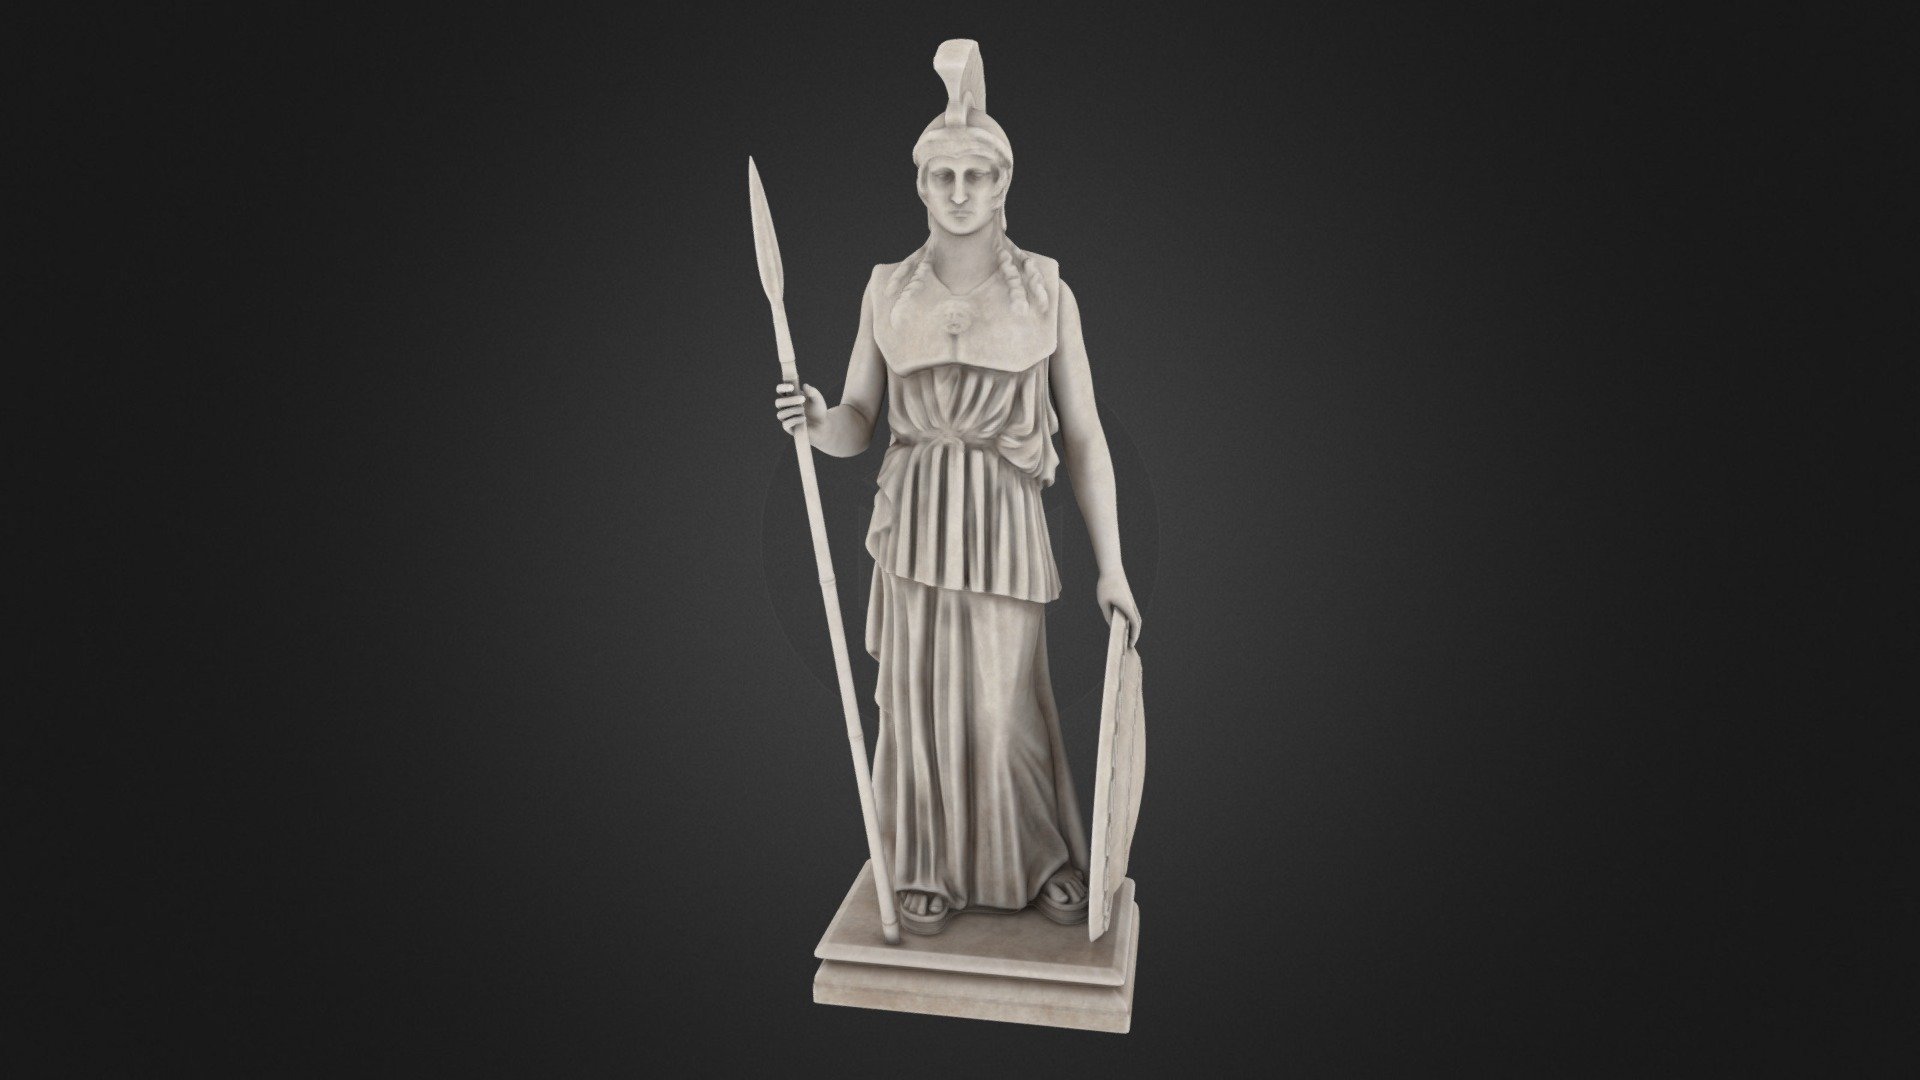 Photorealistic 3D model of a roman Athena statue. The model was initially created in 3Ds Max 2012, then fully textured and rendered using V-Ray.

This model is part of the digital restoration of Heraclea Sintica, Petrich, Bulgaria. Check out more models from this collection: https://skfb.ly/oRTTI - Roman Athena Statue - 3D model by Tornado_Studios 3d model